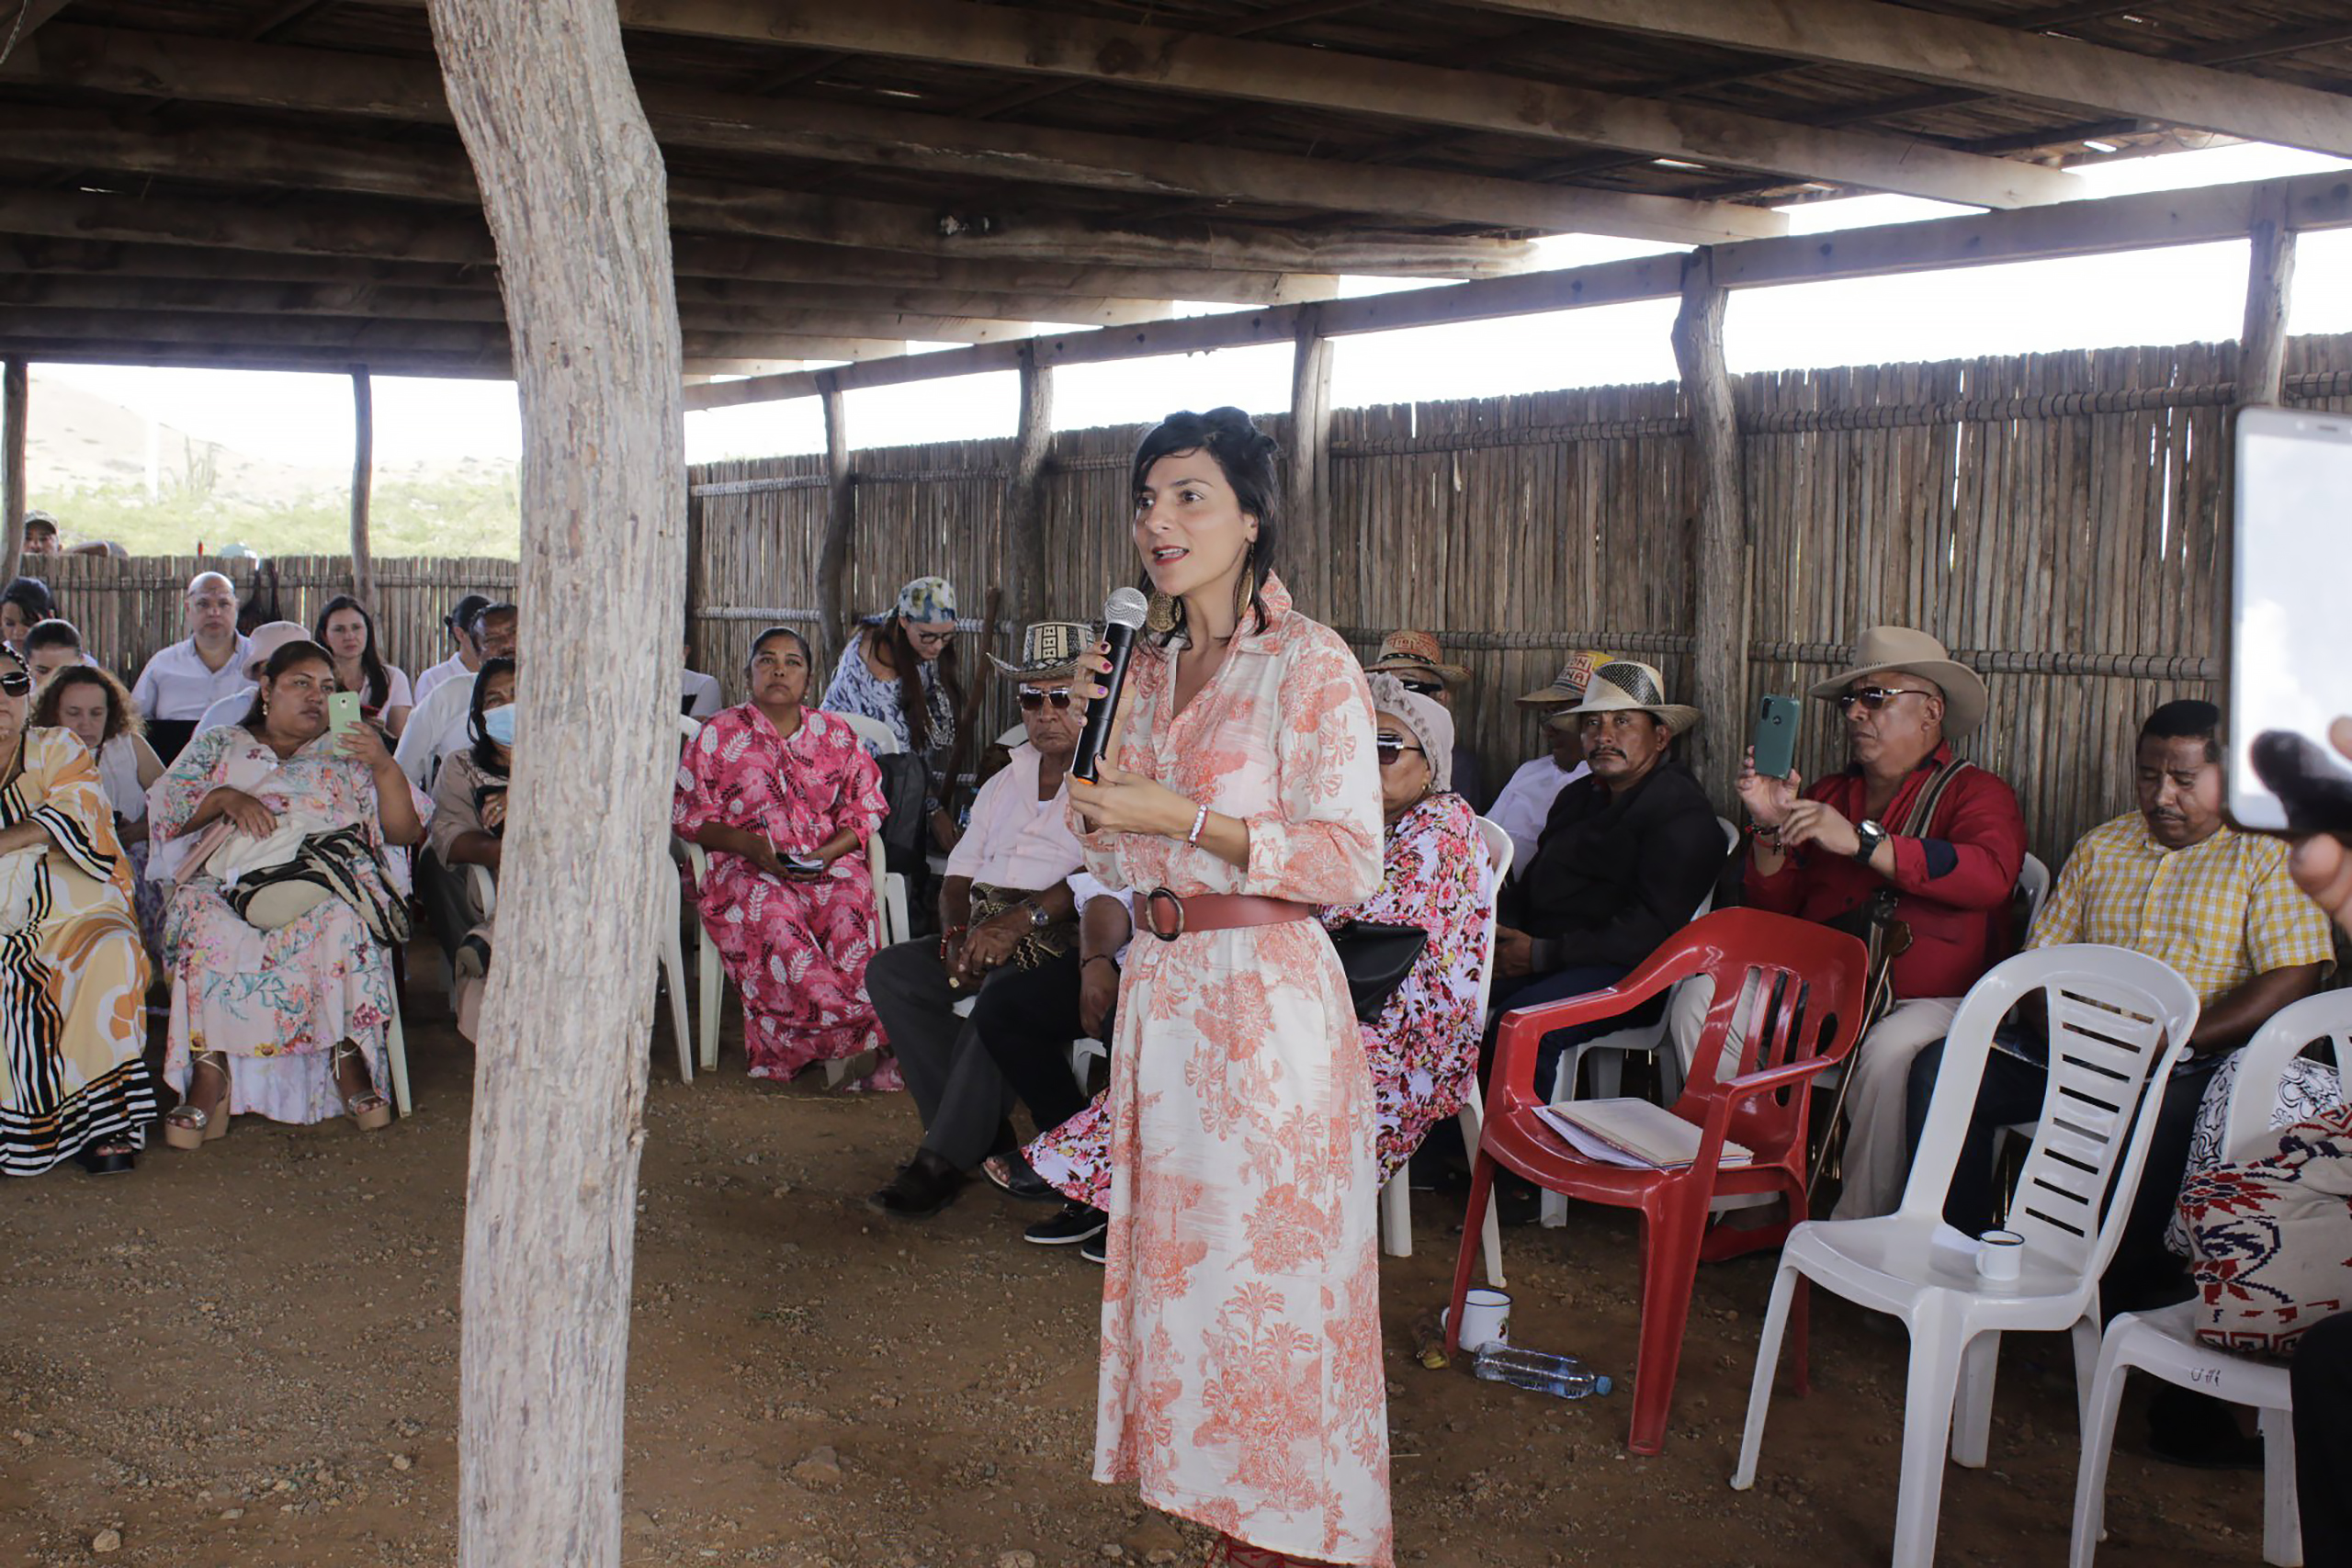 Colombia’s Minister of Mines and Energy, Irene Vélez, discusses renewable energy projects with Wayuu Indigenous communities